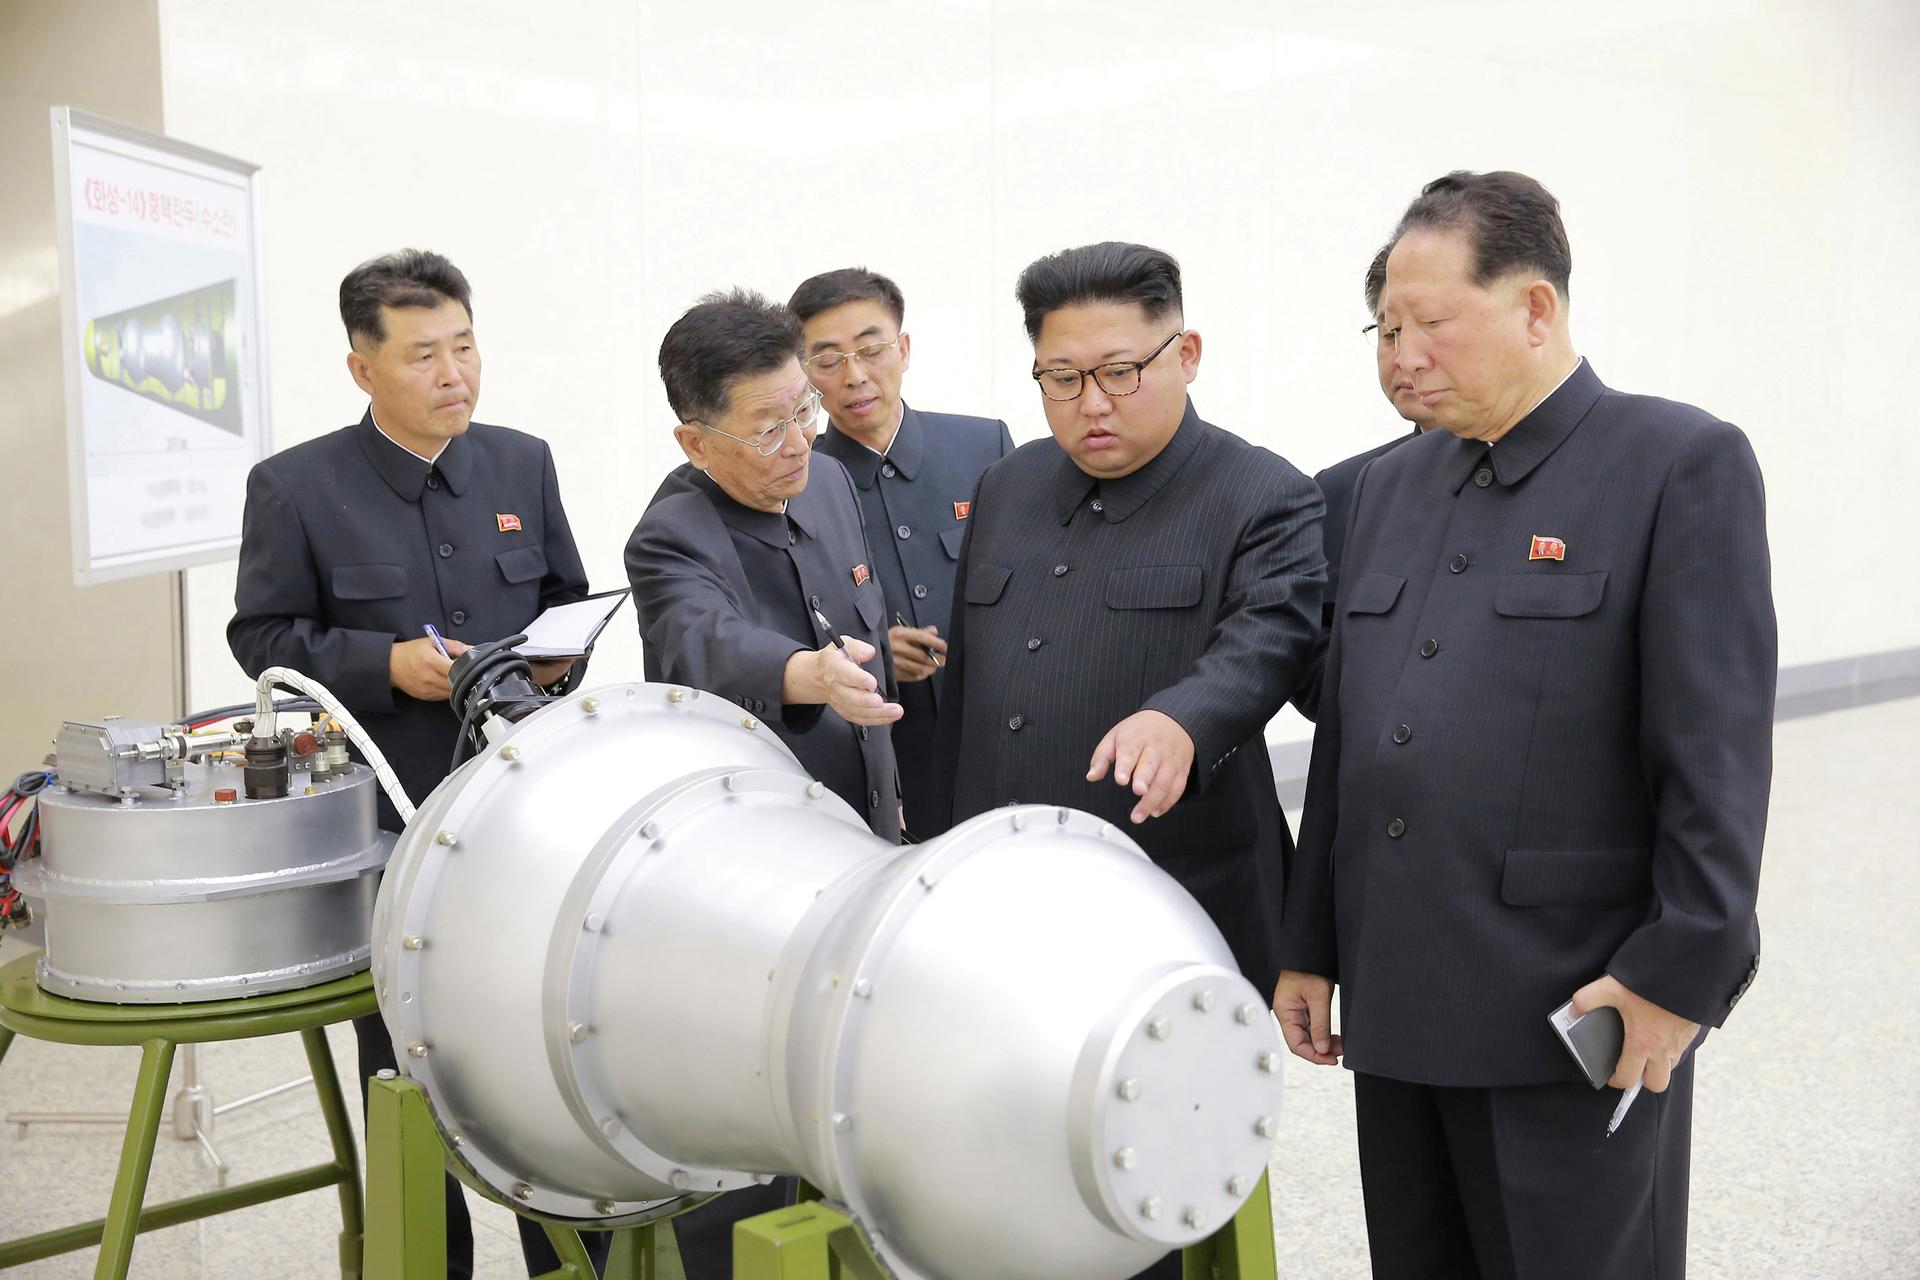 'This bit goes bang' - North Korean leader Kim Jong Un inspects the country's nuclear weapons programme